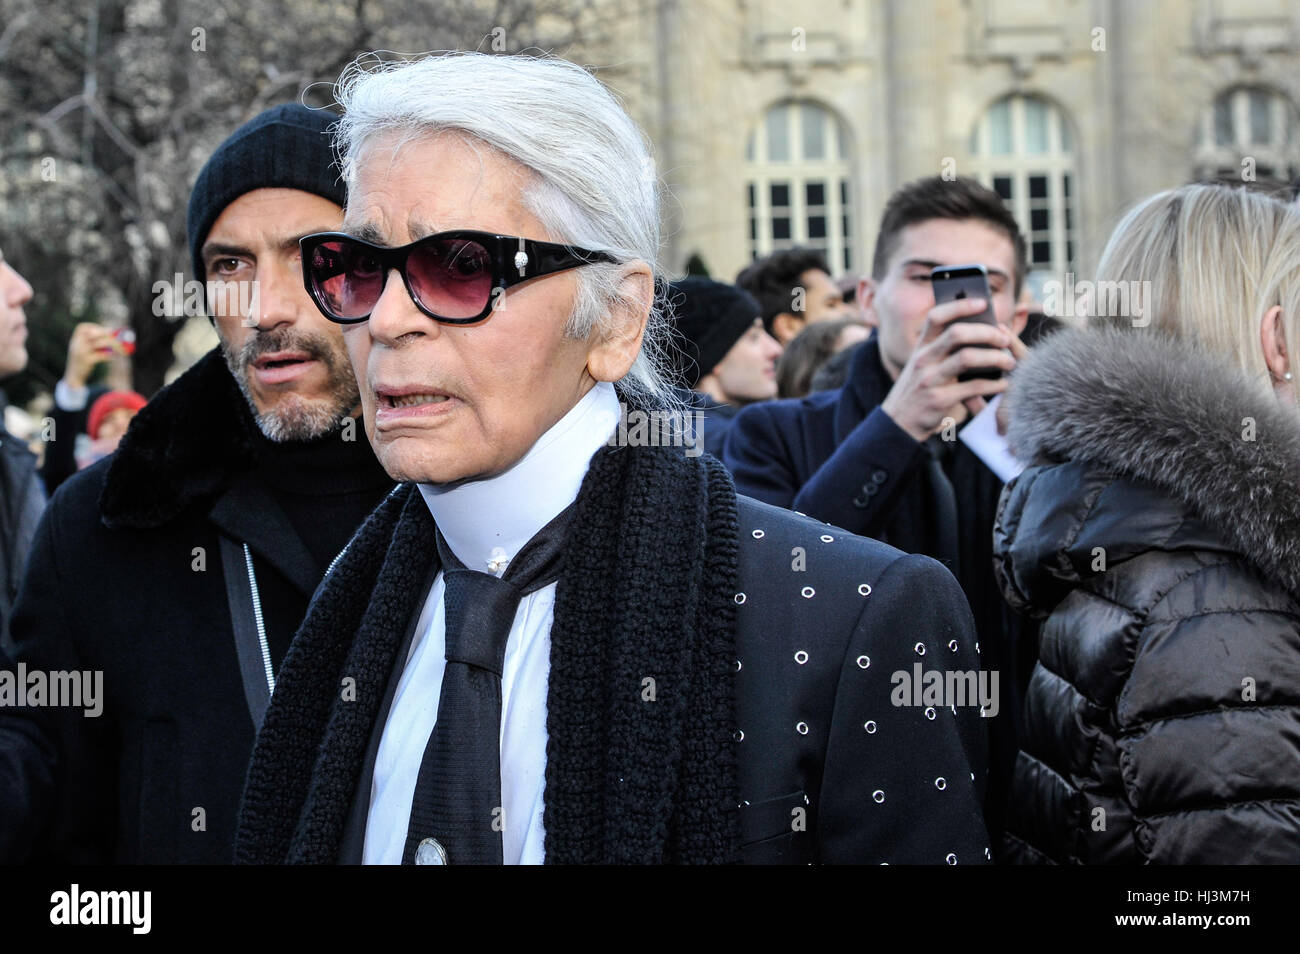 Paris, France. 21st Jan, 2017. Stylist Karl Lagerfeld is seen arriving at  Dior Fashion Show during Paris Fashion Week Credit: Gaetano  Piazzolla/Pacific Press/Alamy Live News Stock Photo - Alamy